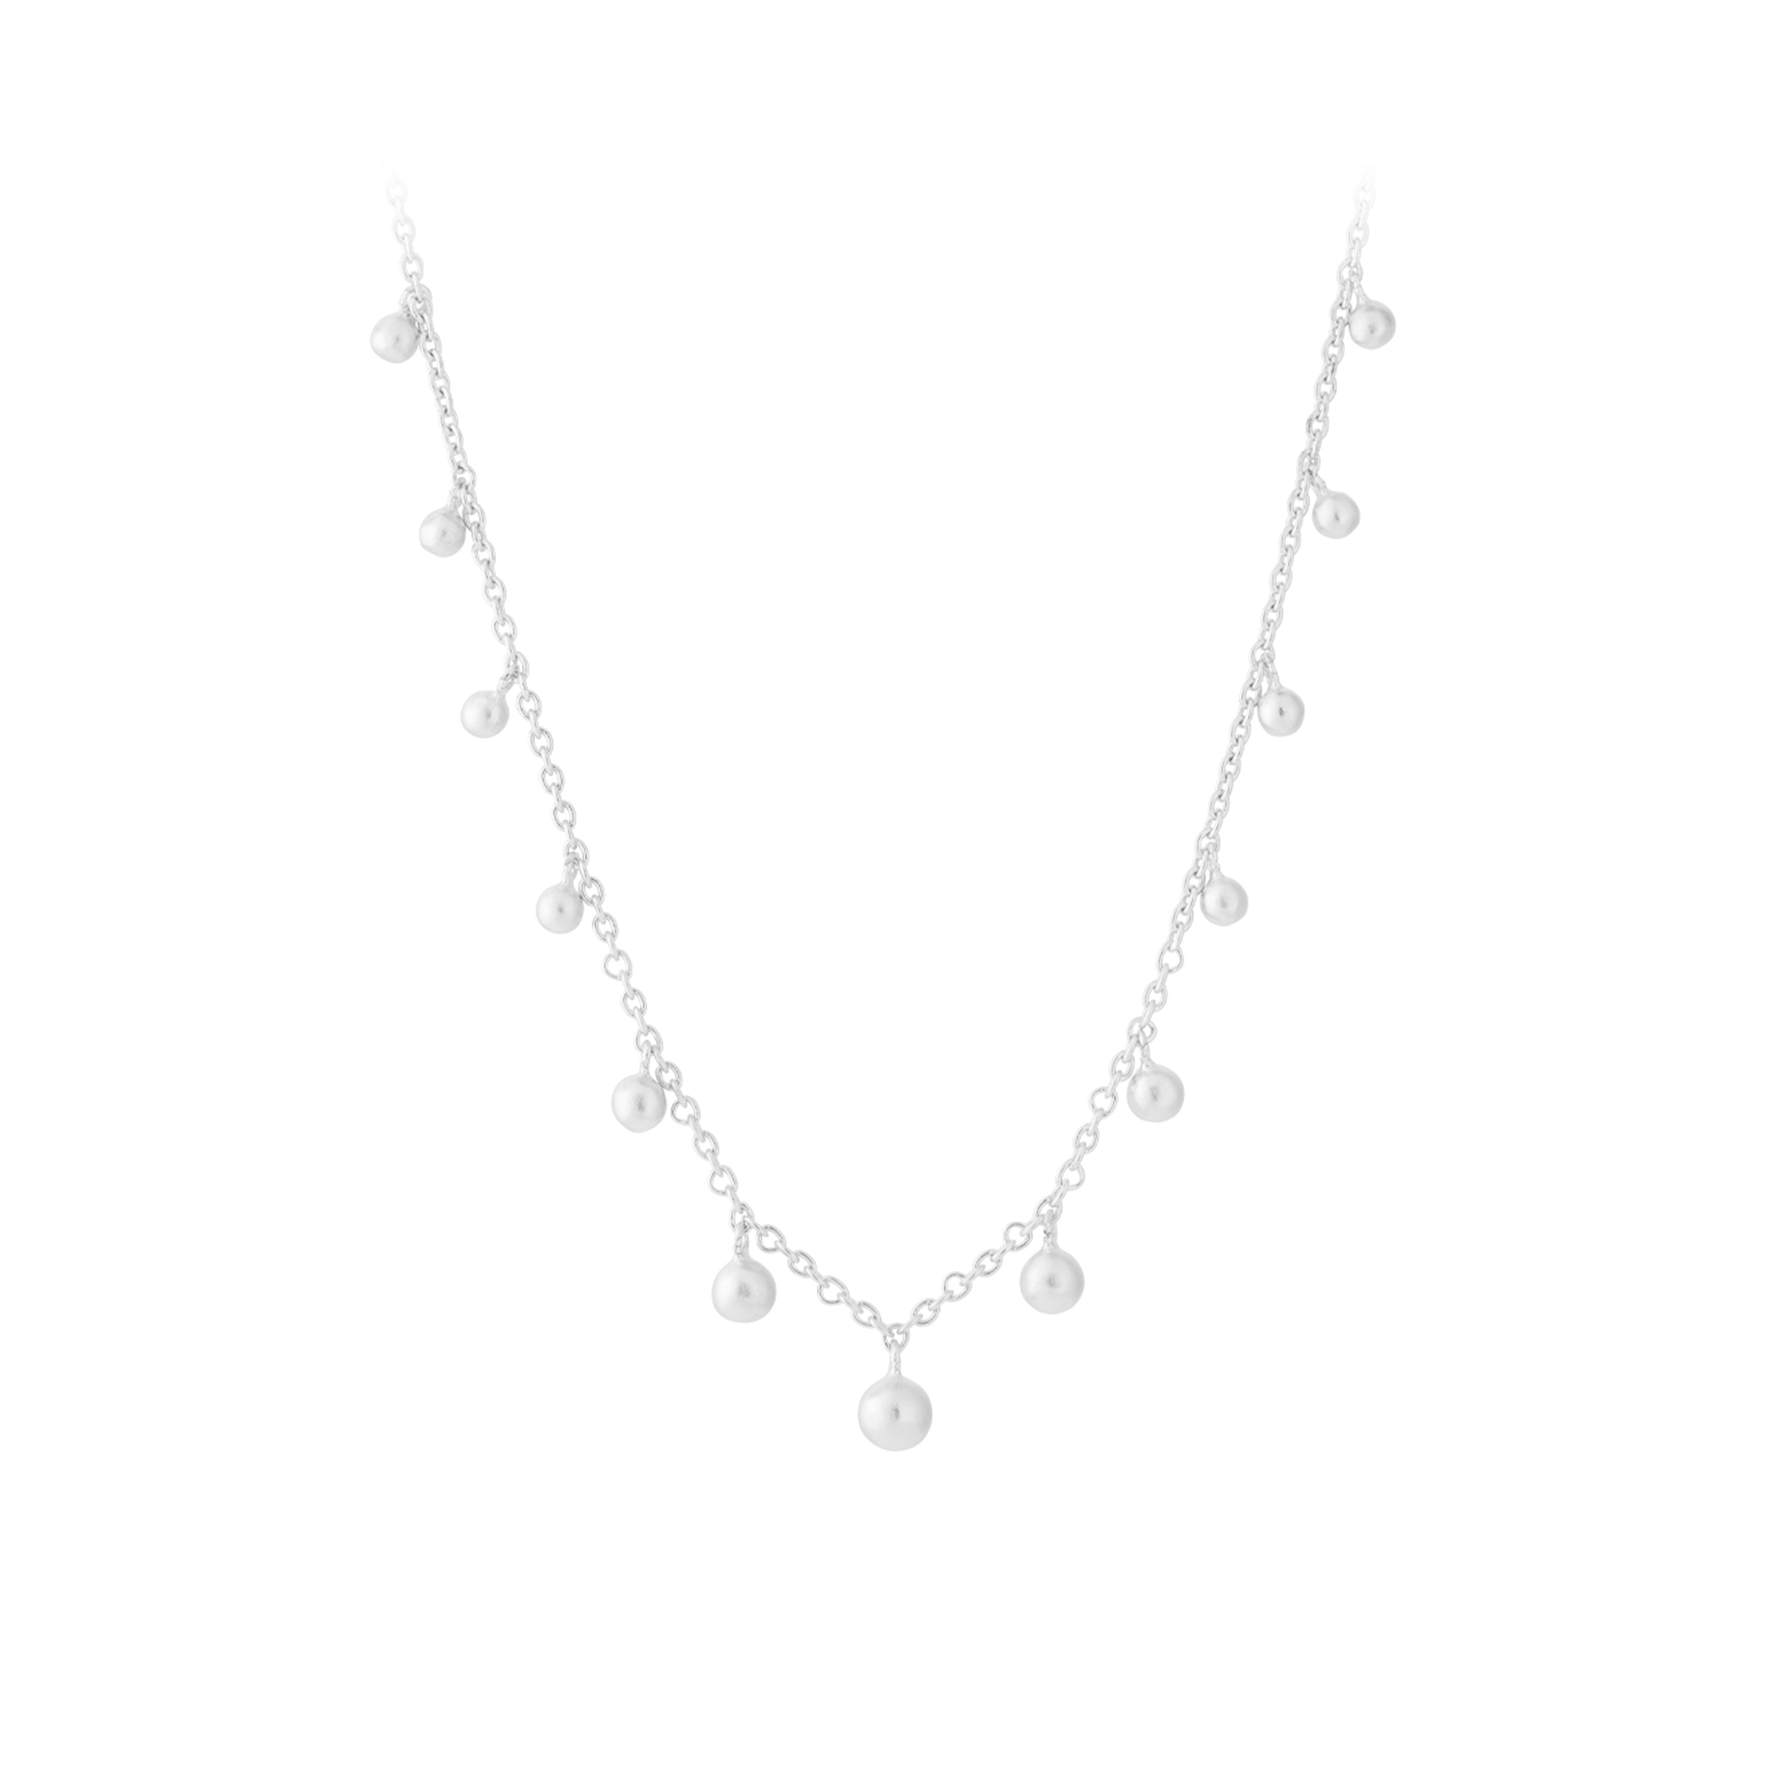 Comet Necklace from Pernille Corydon in Silver Sterling 925